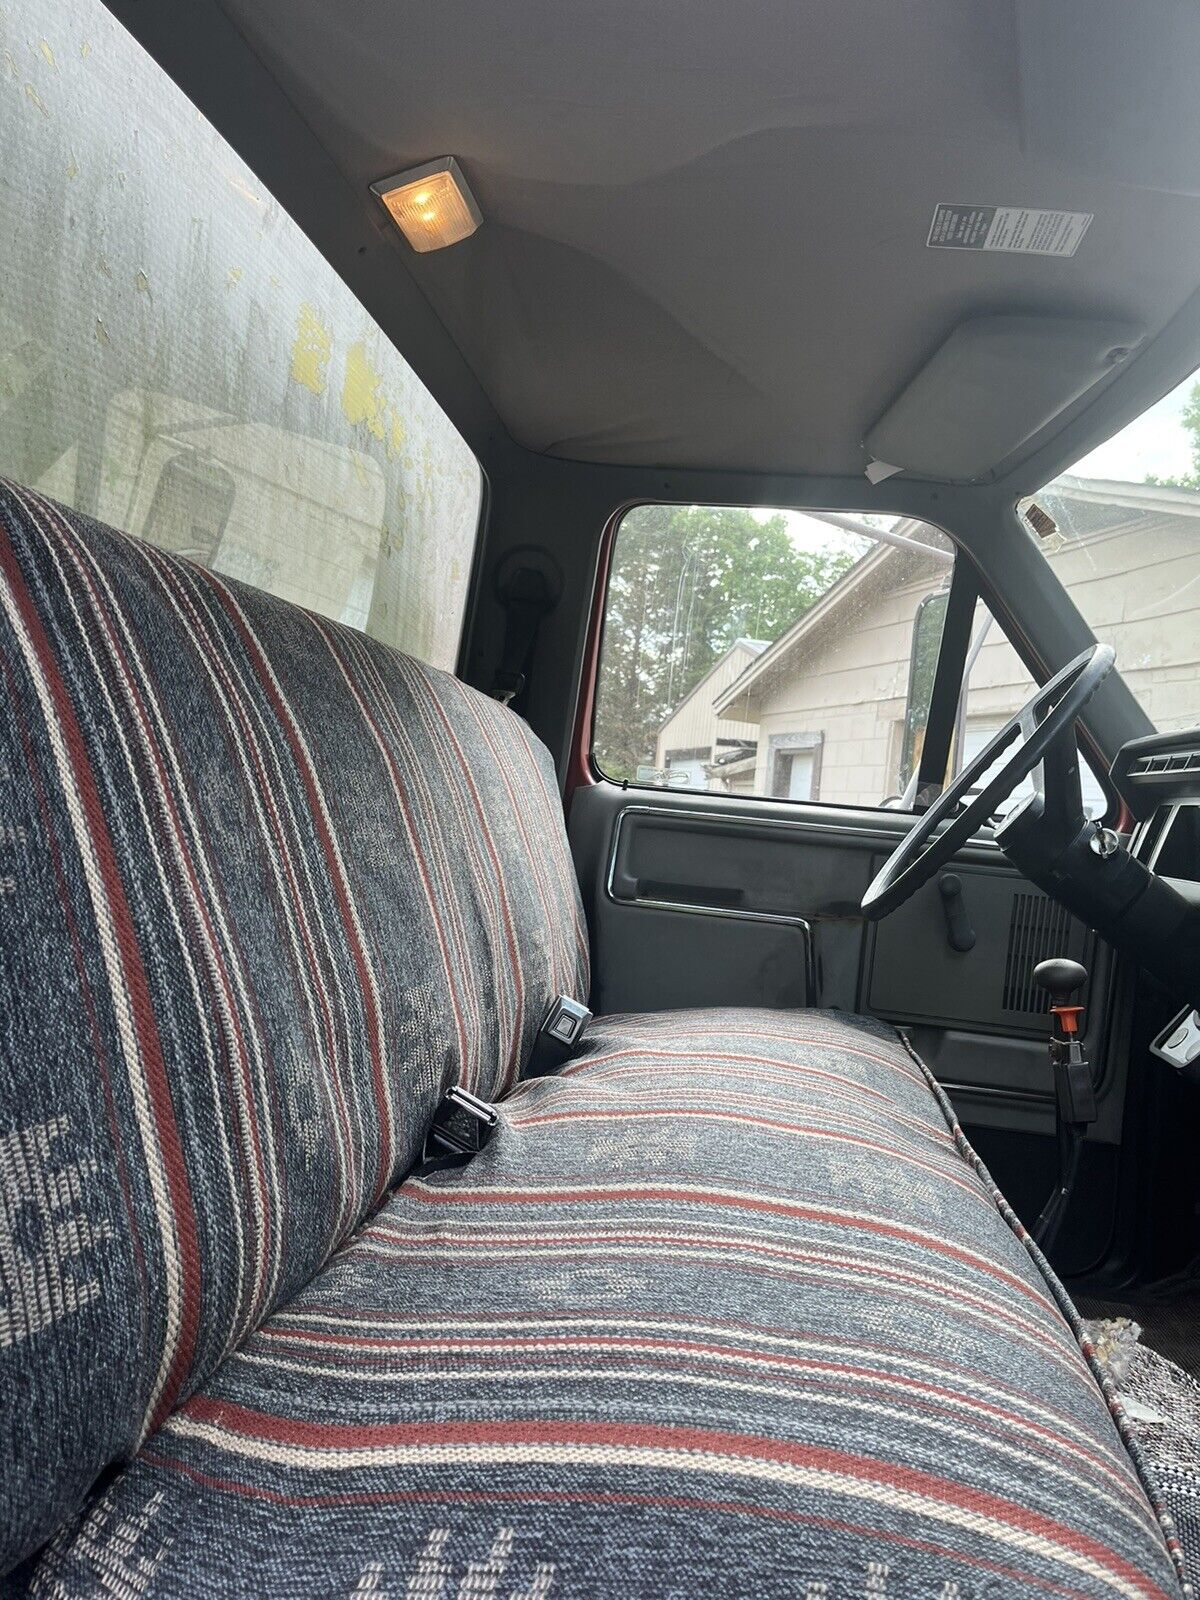 Universal Saddleblanket Seat Cover for Truck bench Seats Gray/Black Made In USA